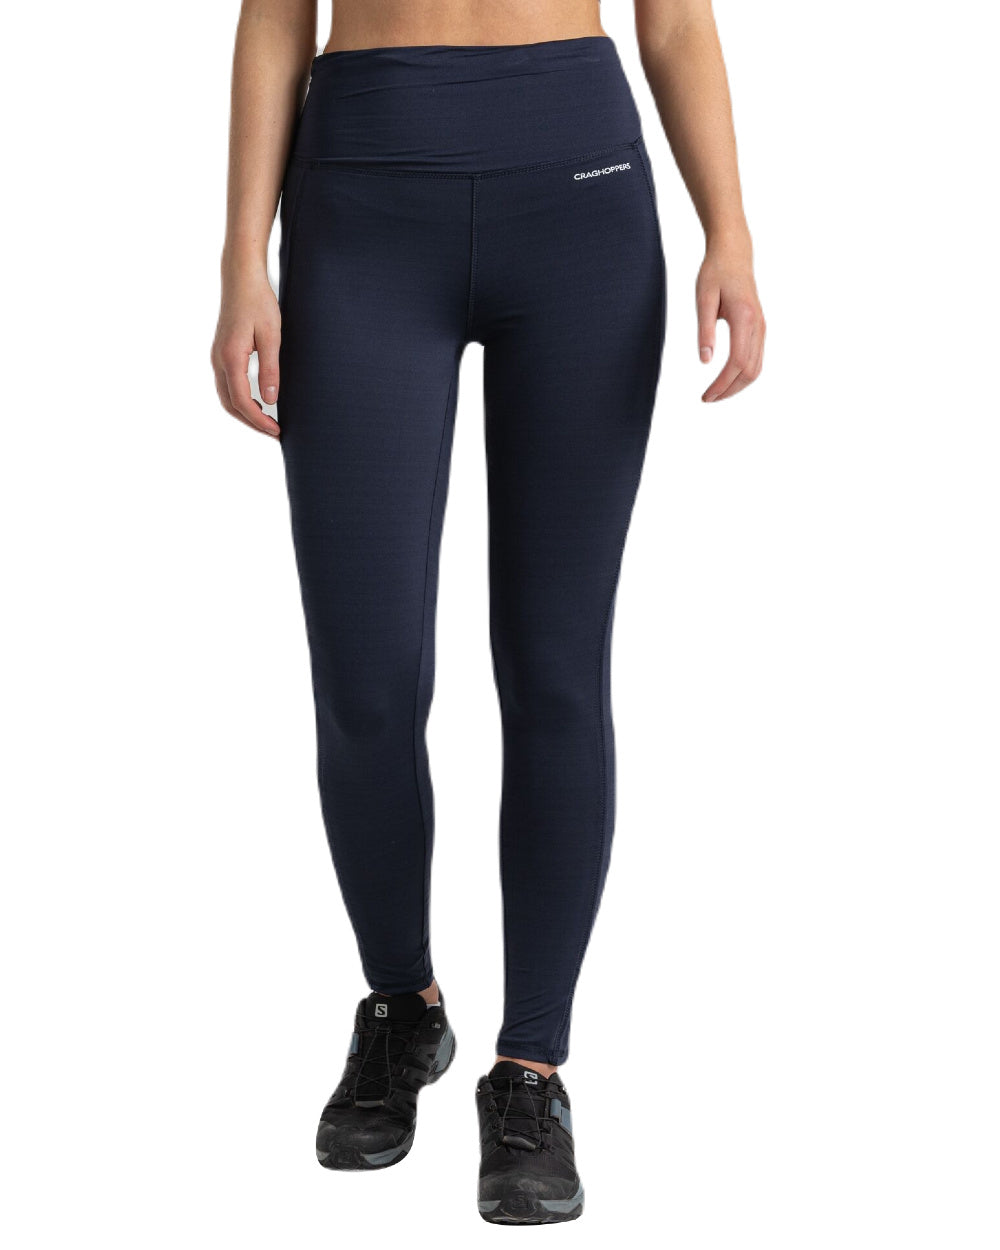 Blue Navy Coloured Craghoppers Womens NosiLife Durrel Leggings On A White Background 